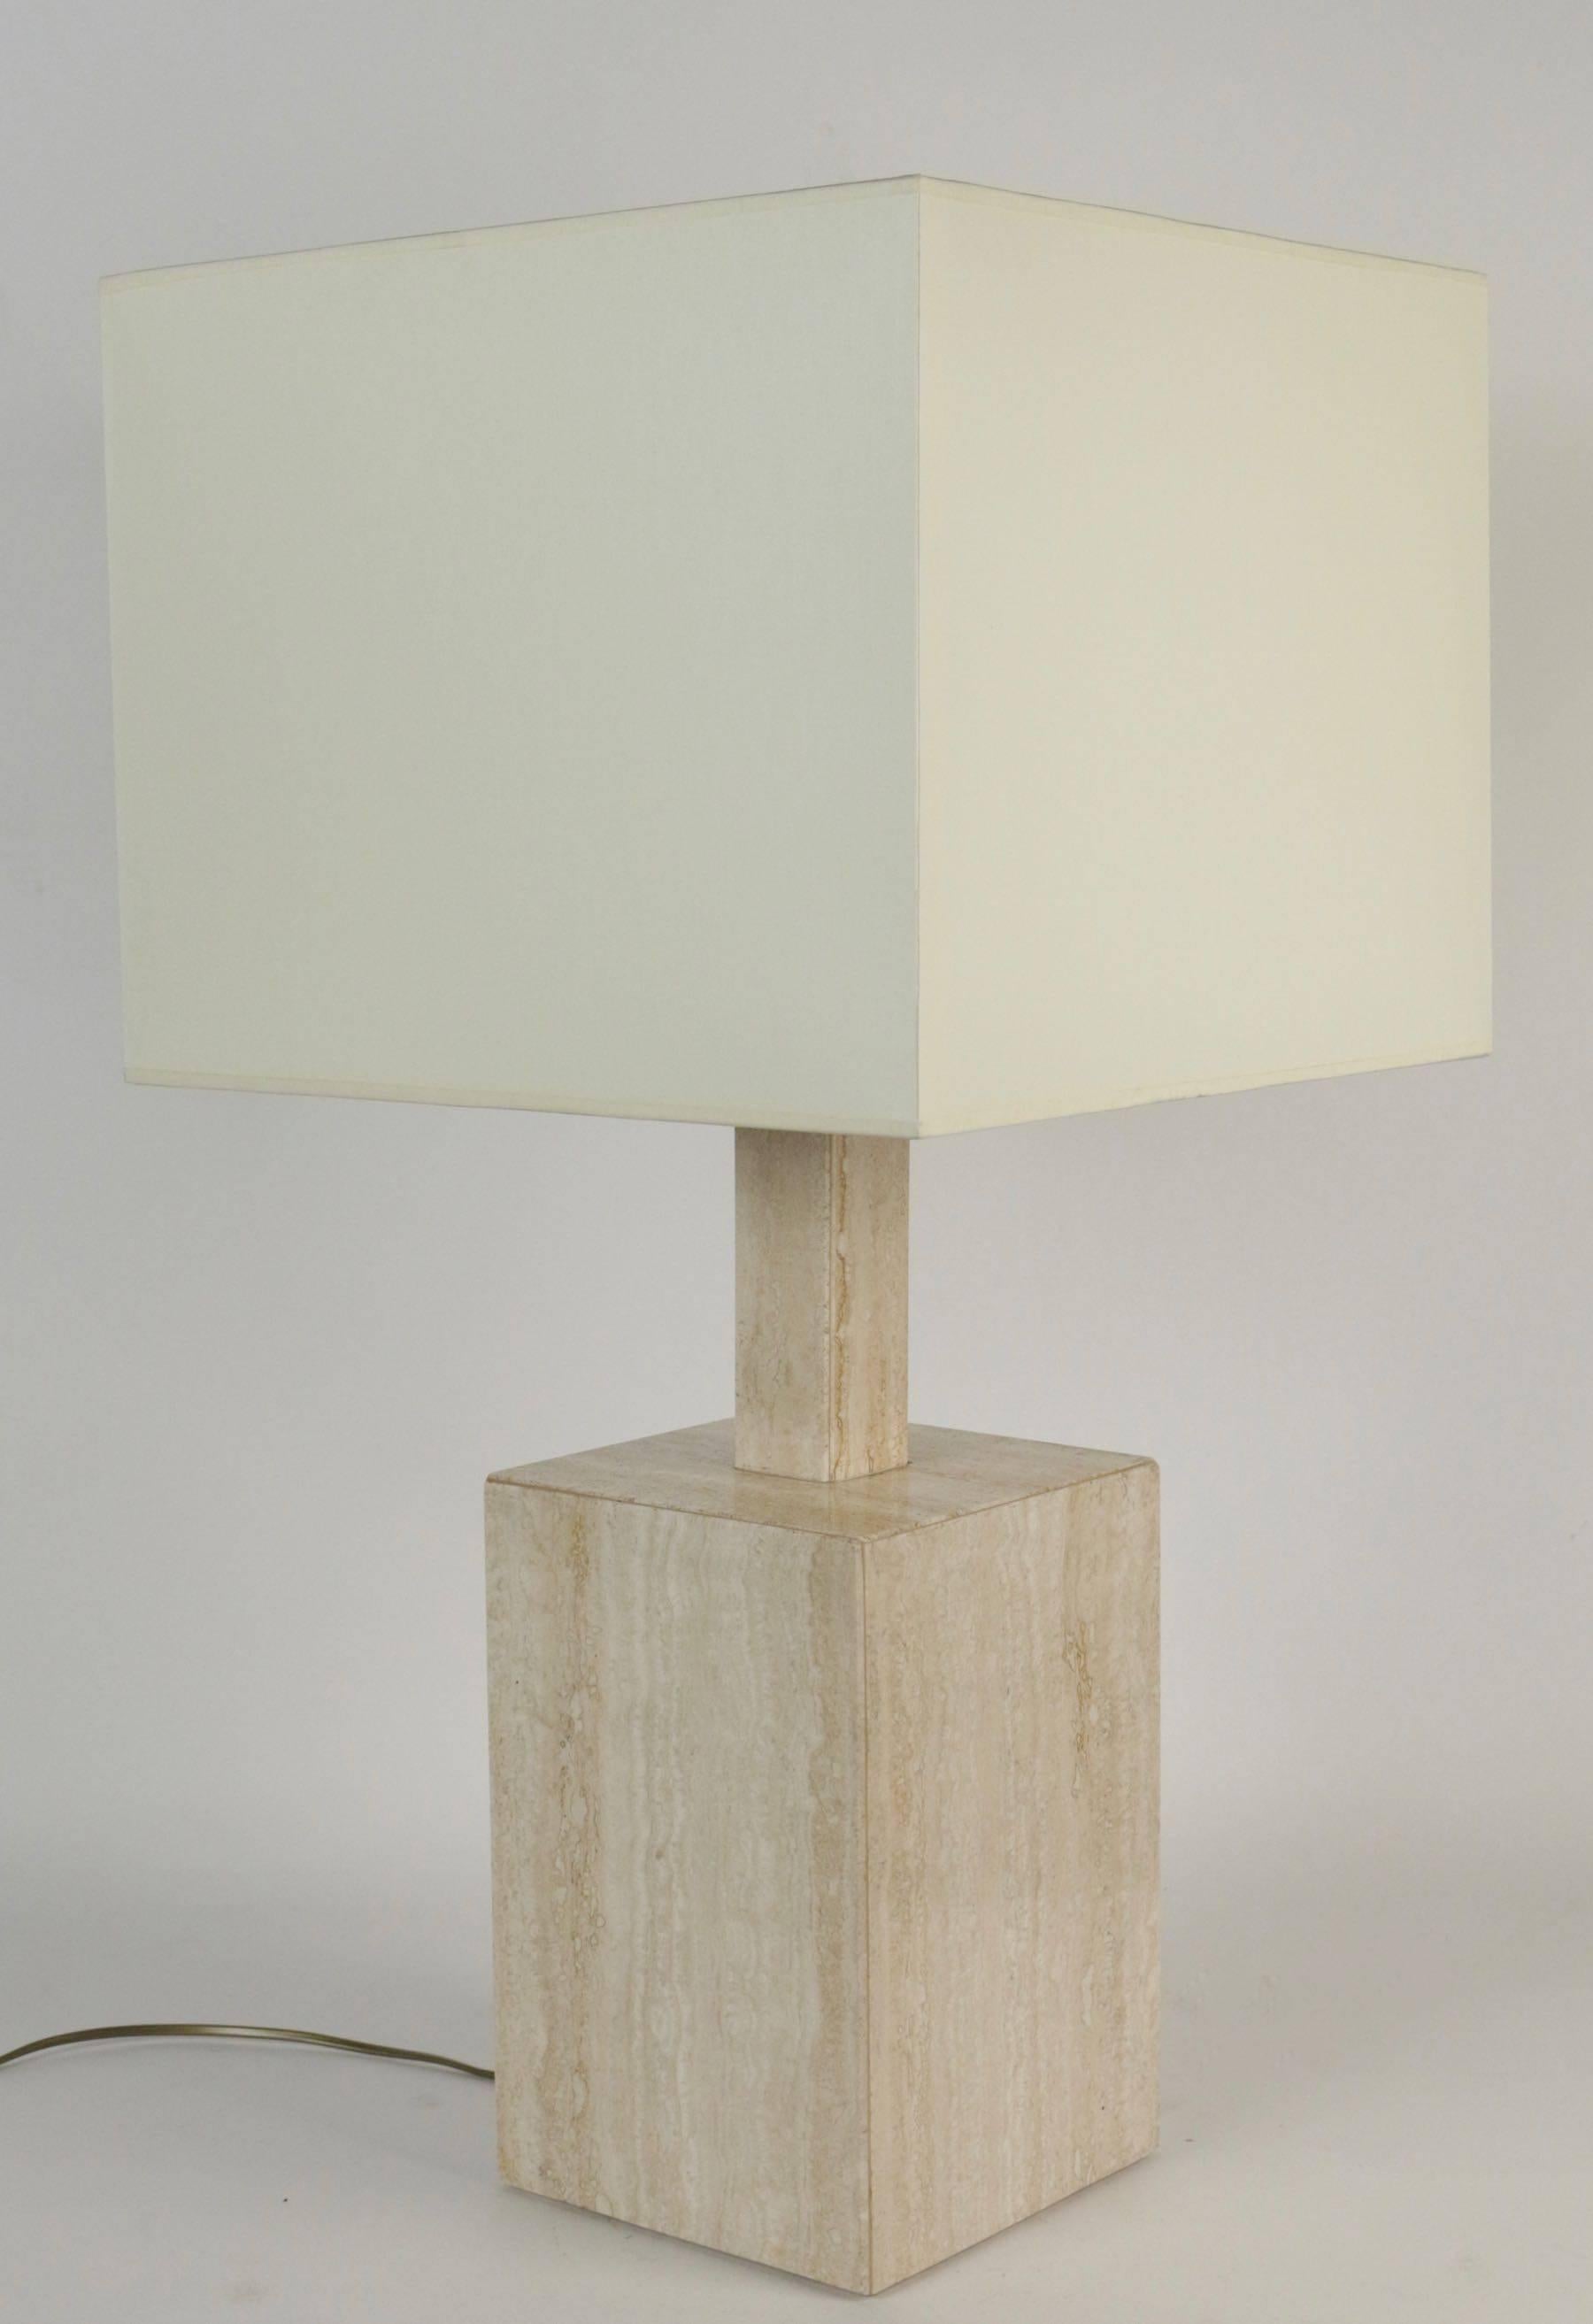 Travertine marble lamp circa 1960 inspired by Cubism, 20th century.
 